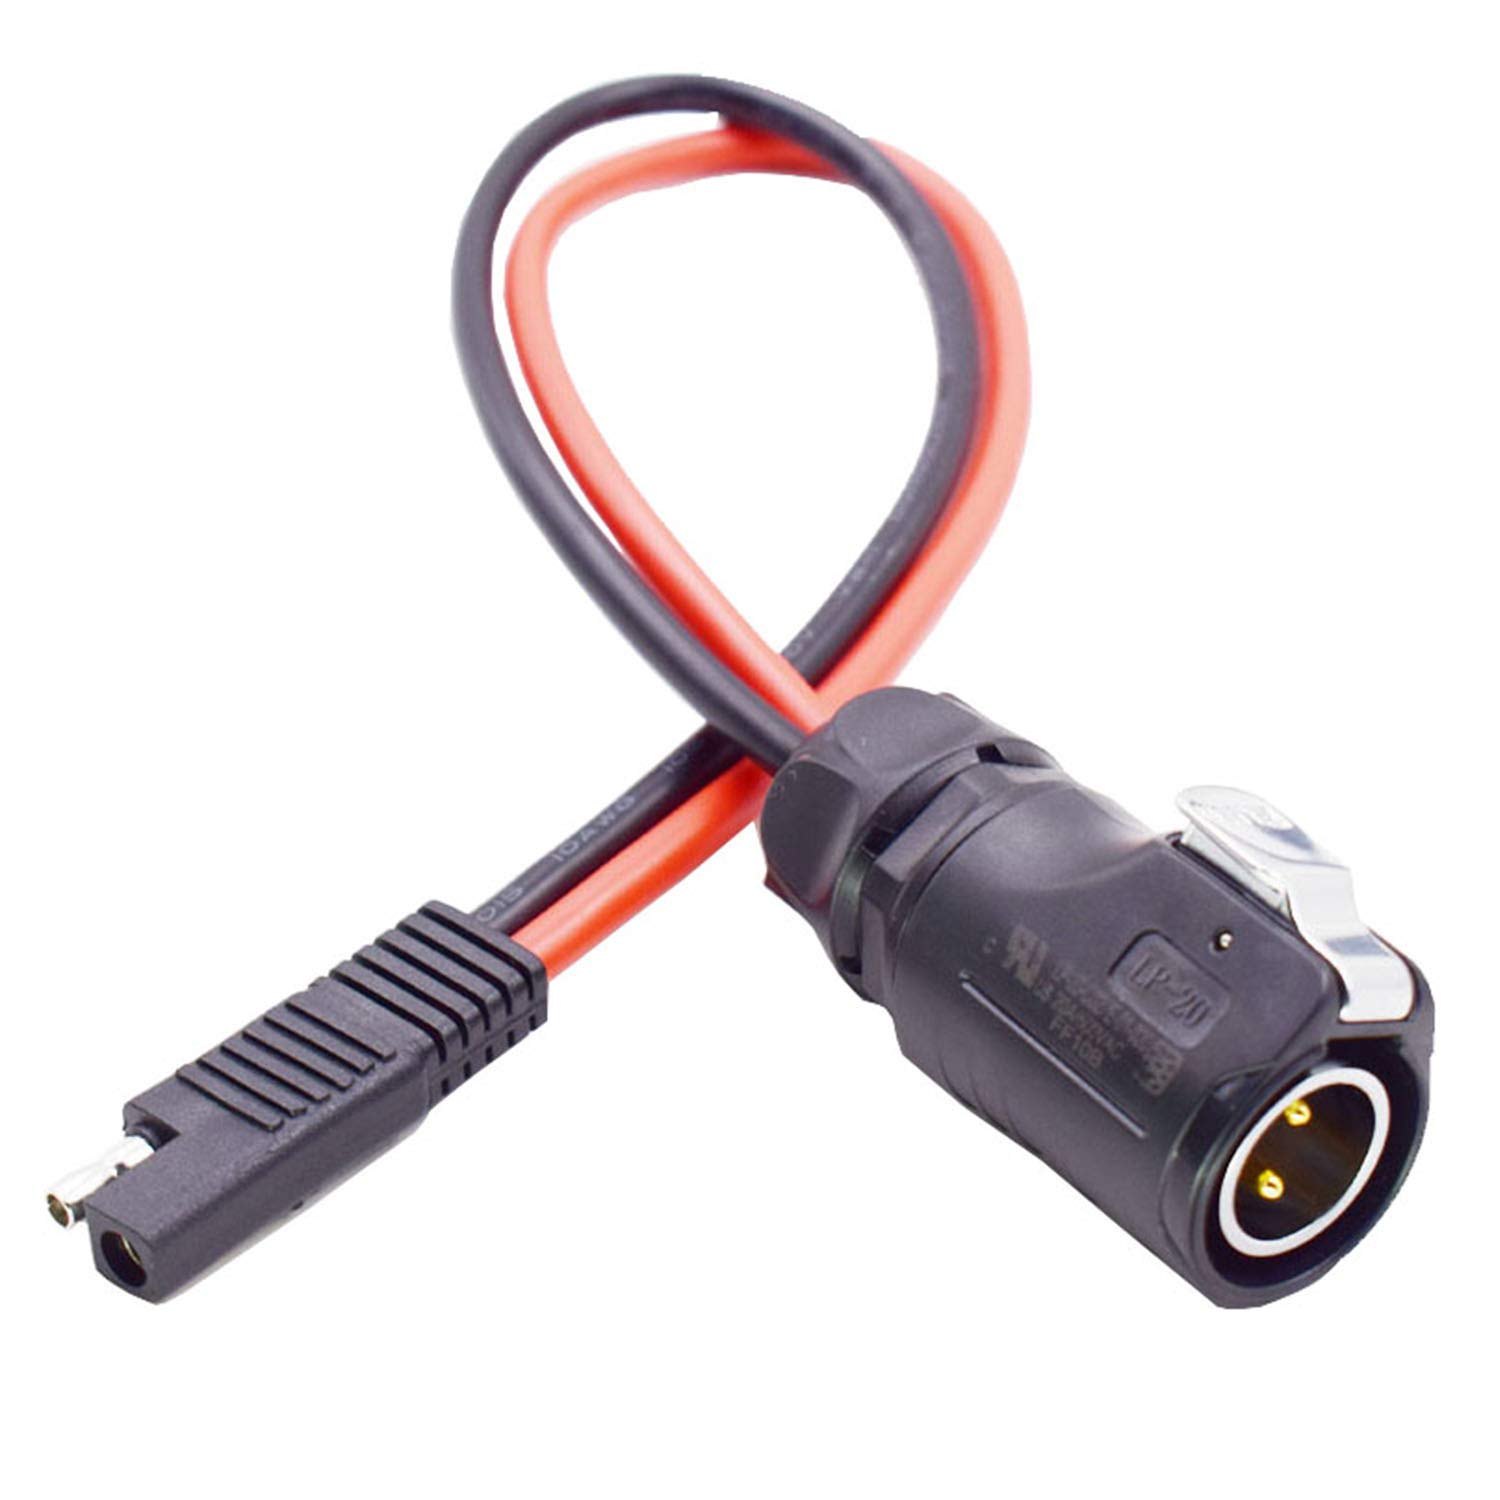 LIXINTIAN 2 Pin Power Industrial Circular Connector Cable to SAE Cable Adapter, 10AWG Cable for Furrion,Solar Panel Suitcase, Forrest River RV Ports